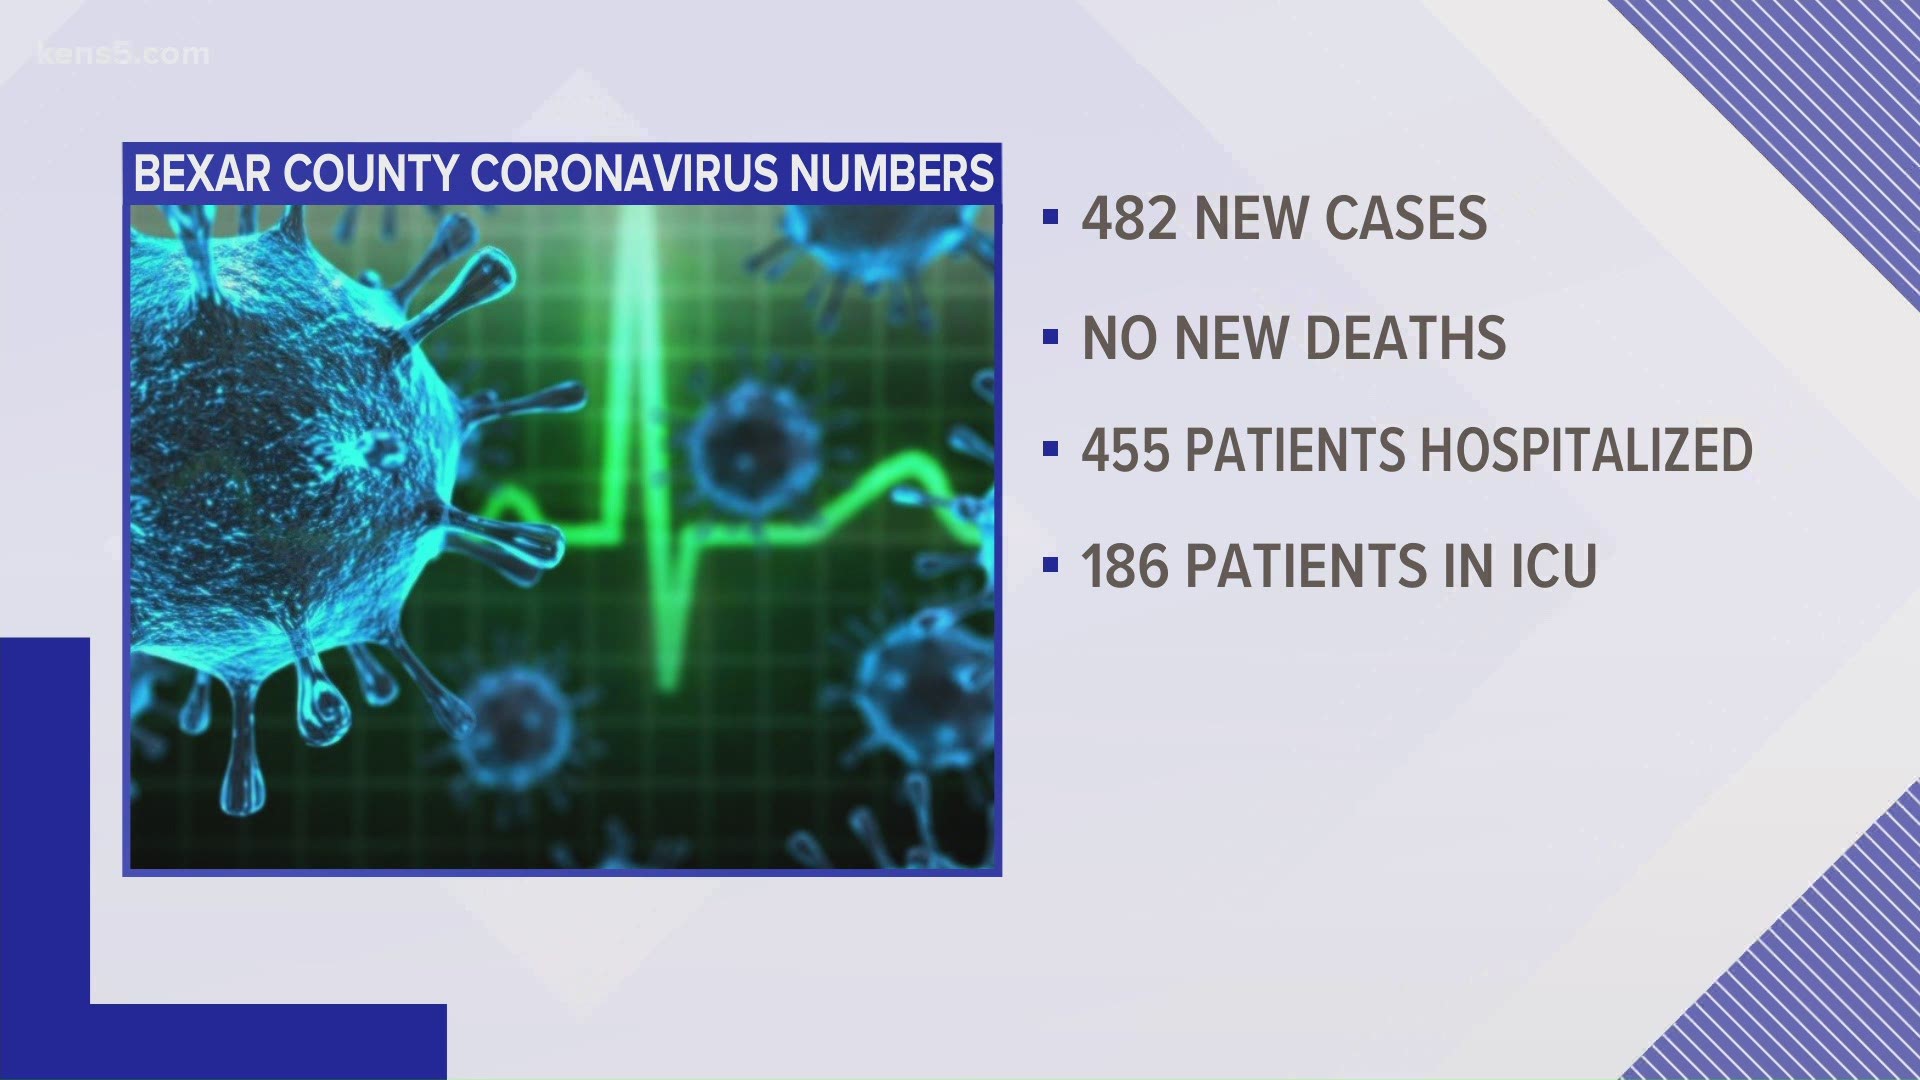 More than 195,000 county residents have been diagnosed with the coronavirus since the pandemic started.